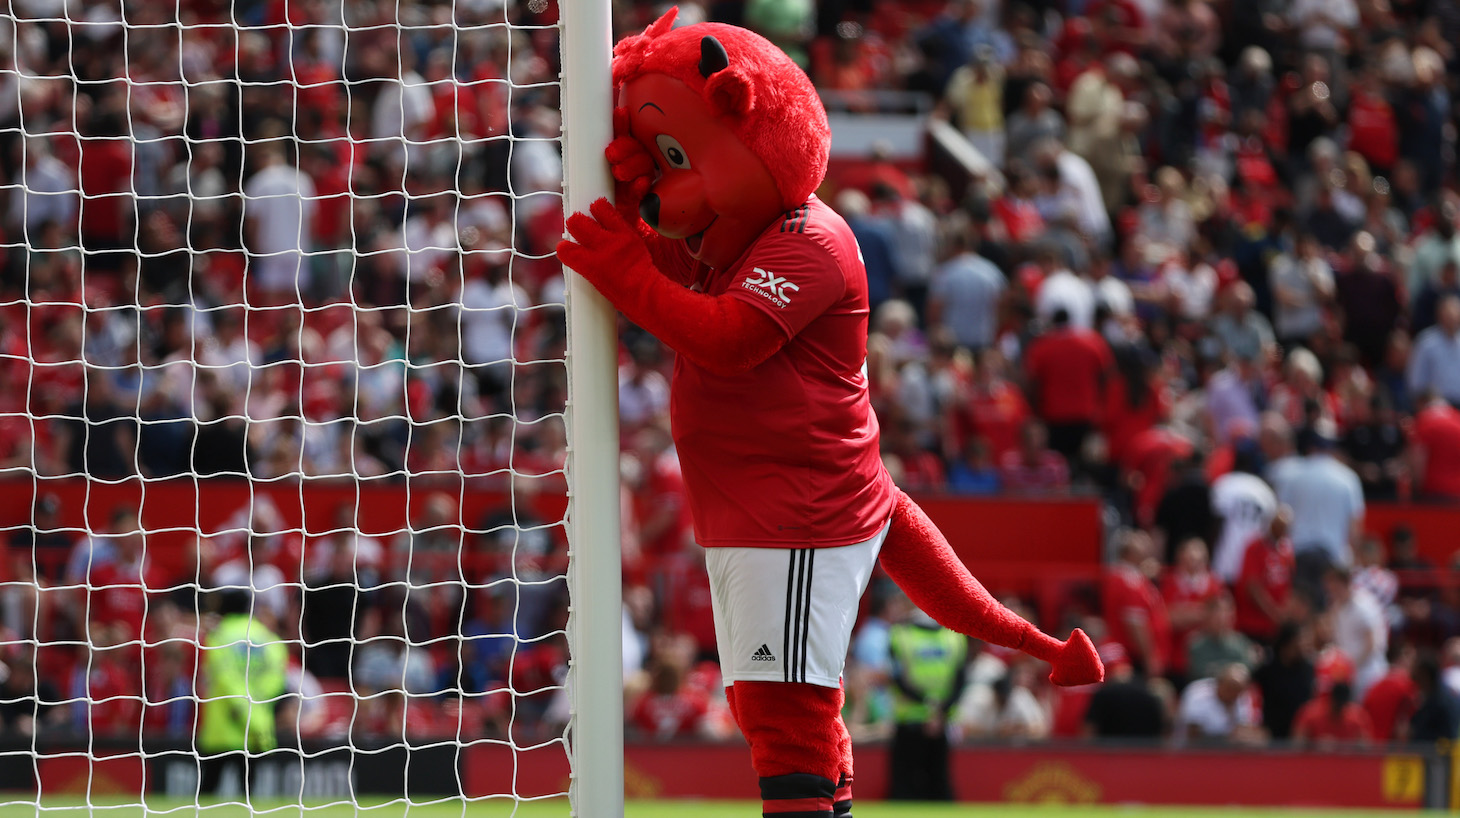 Manchester United mascot Fred the Red during the Premier League match between Manchester United and Brighton &amp; Hove Albion at Old Trafford on August 07, 2022 in Manchester, England.